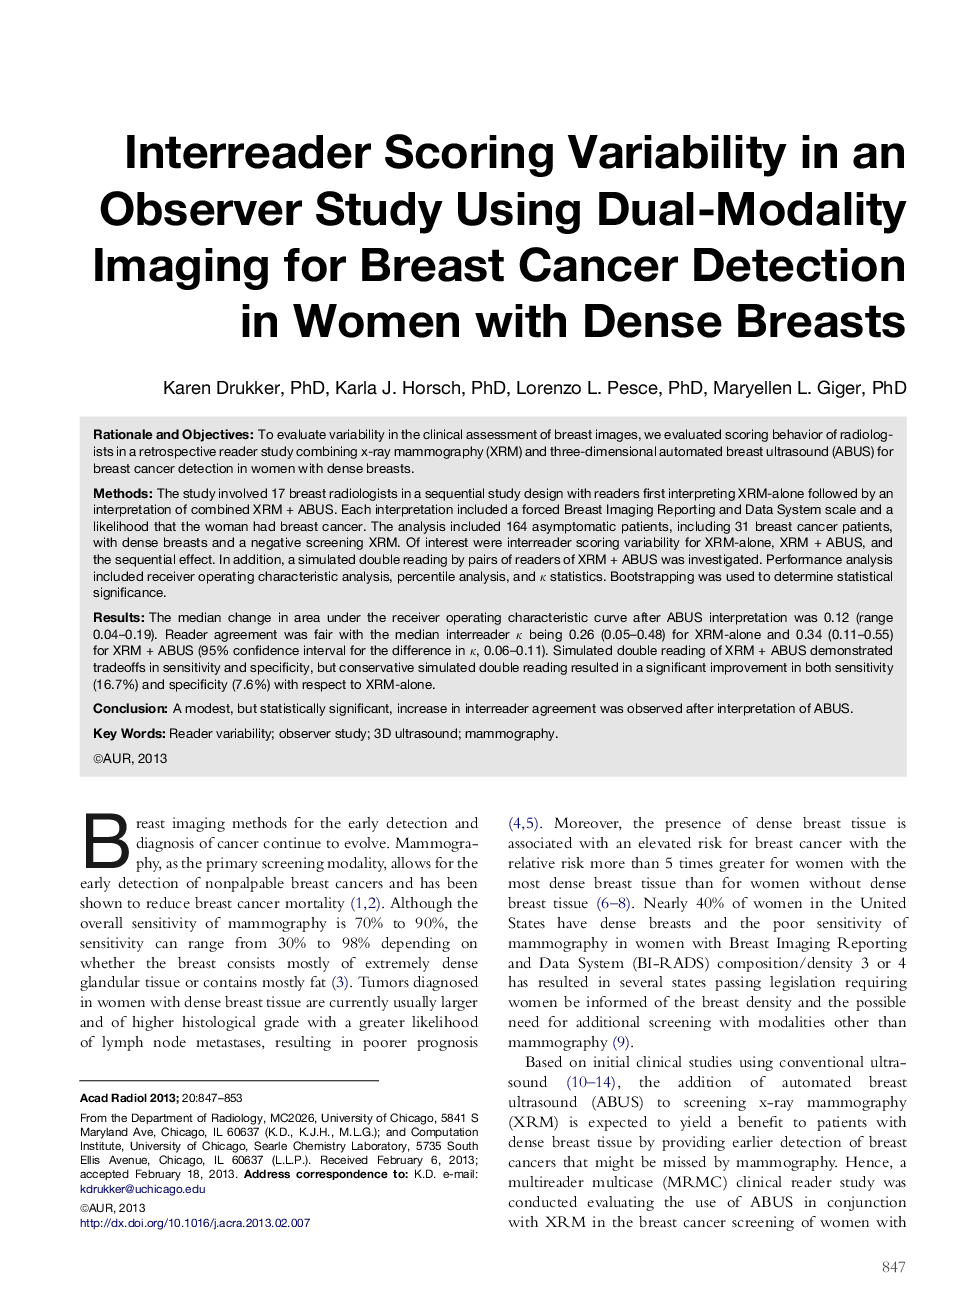 Interreader Scoring Variability in an Observer Study Using Dual-Modality Imaging for Breast Cancer Detection in Women with Dense Breasts